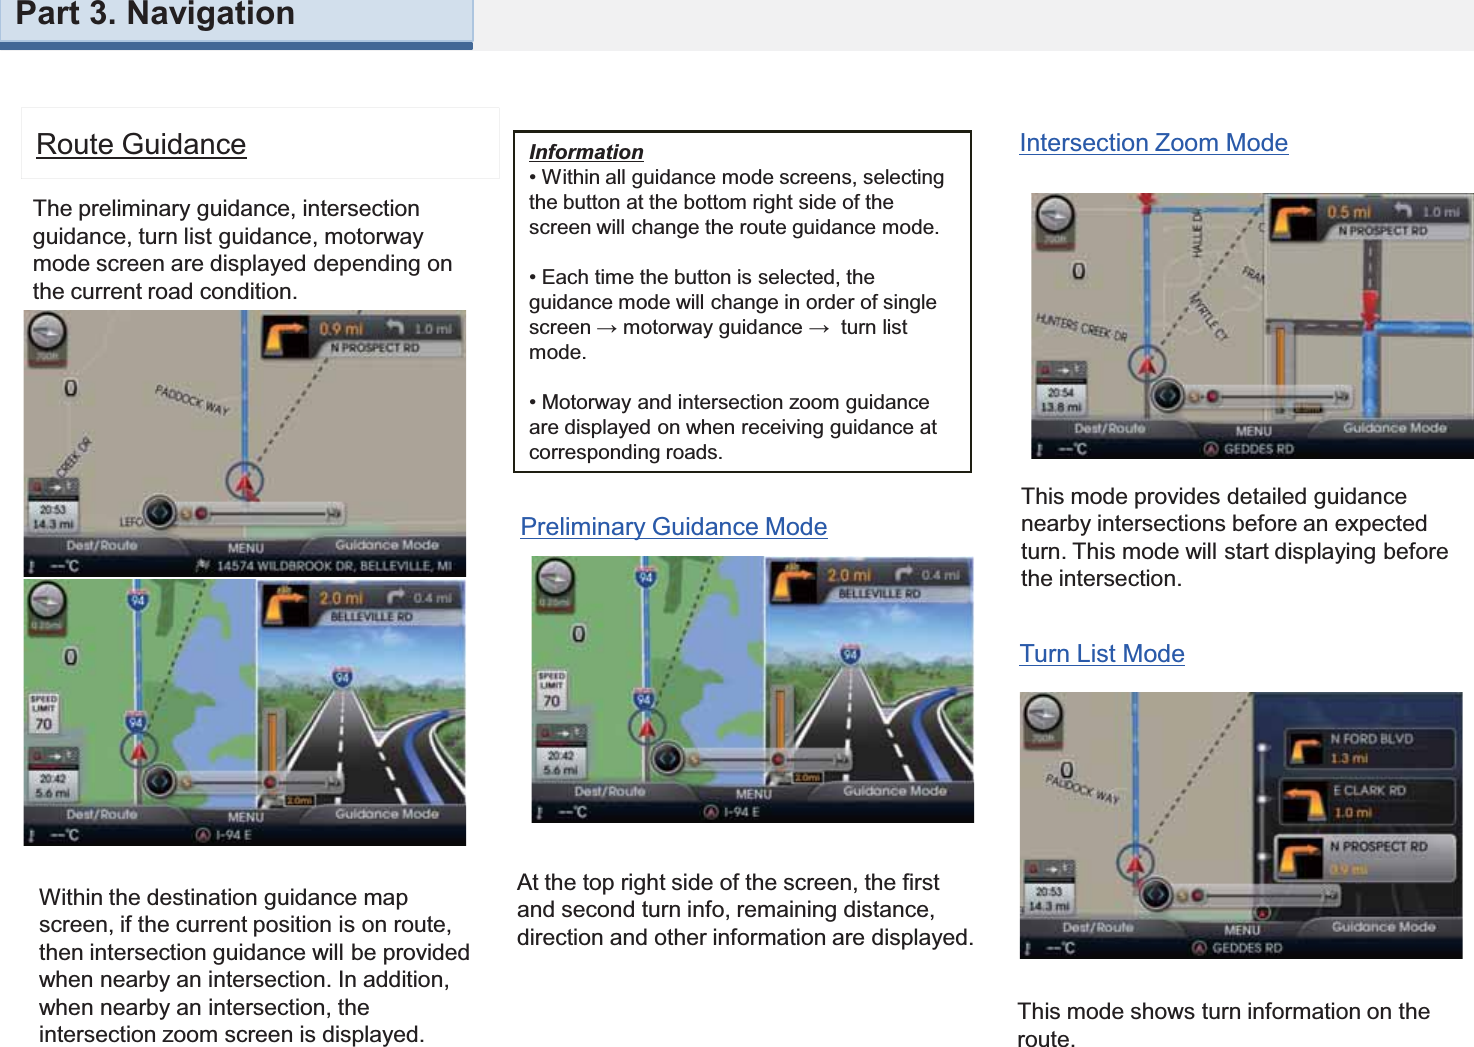 Within the destination guidance map screen, if the current position is on route, then intersection guidance will be provided when nearby an intersection. In addition, when nearby an intersection, the intersection zoom screen is displayed.Route GuidanceThe preliminary guidance, intersection guidance, turn list guidance, motorway mode screen are displayed depending on the current road condition.Information• Within all guidance mode screens, selecting the button at the bottom right side of the screen will change the route guidance mode.• Each time the button is selected, the guidance mode will change in order of single screen → motorway guidance →  turn list mode.• Motorway and intersection zoom guidance are displayed on when receiving guidance at corresponding roads.At the top right side of the screen, the first and second turn info, remaining distance, direction and other information are displayed.Preliminary Guidance ModeThis mode provides detailed guidance nearby intersections before an expected turn. This mode will start displaying before the intersection.Intersection Zoom ModeThis mode shows turn information on the route.Turn List ModePart 3. Navigation